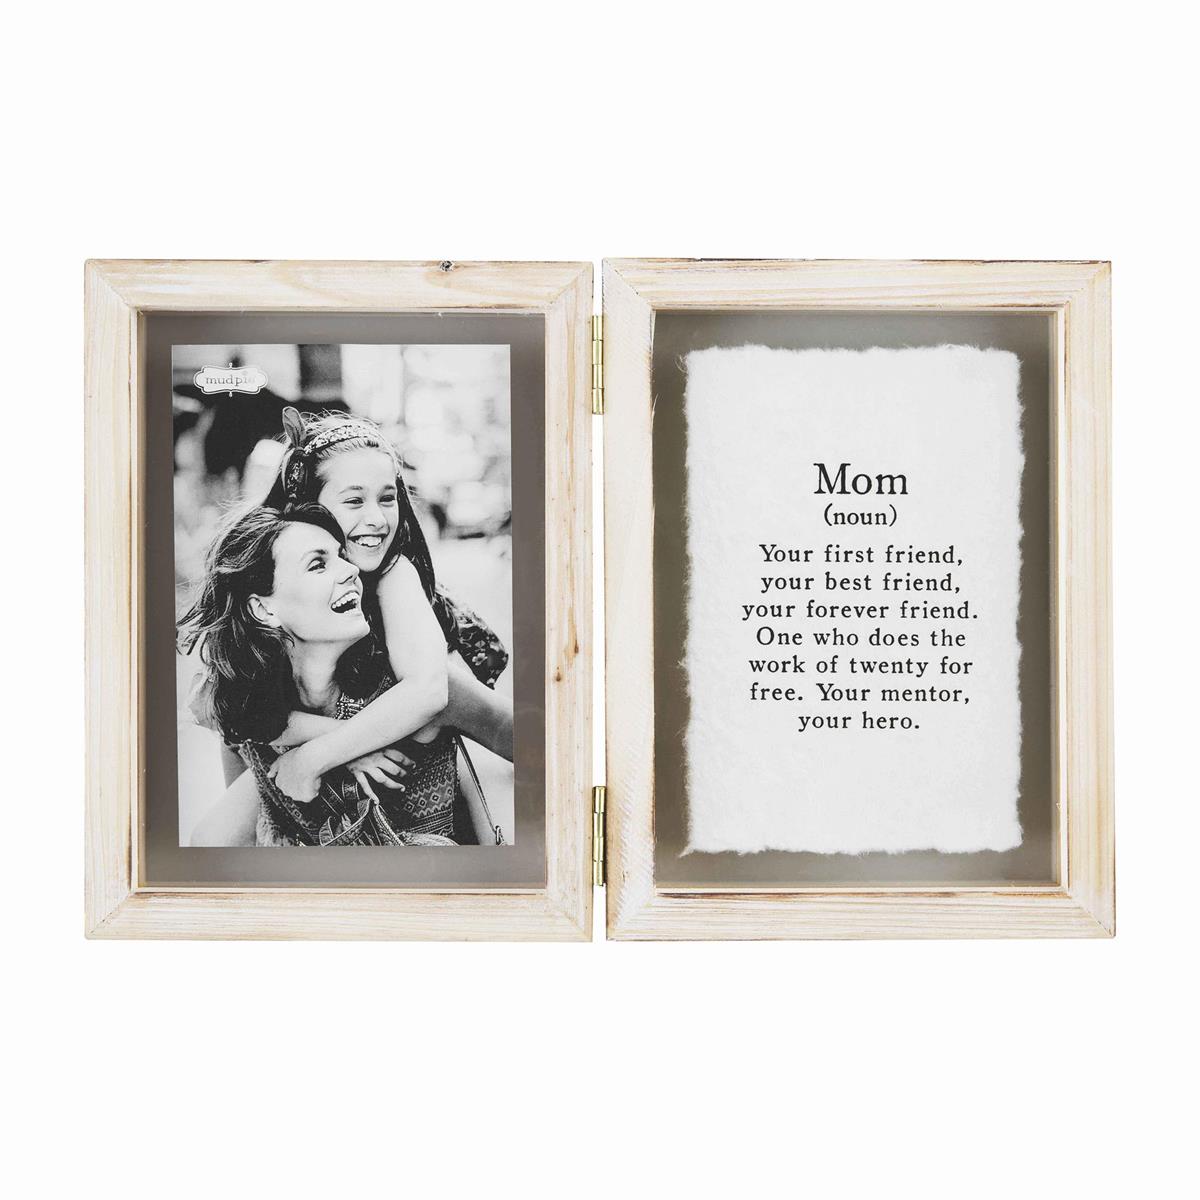 mom hinged frame with quote on one side and picture on other. white wash wood mud pie